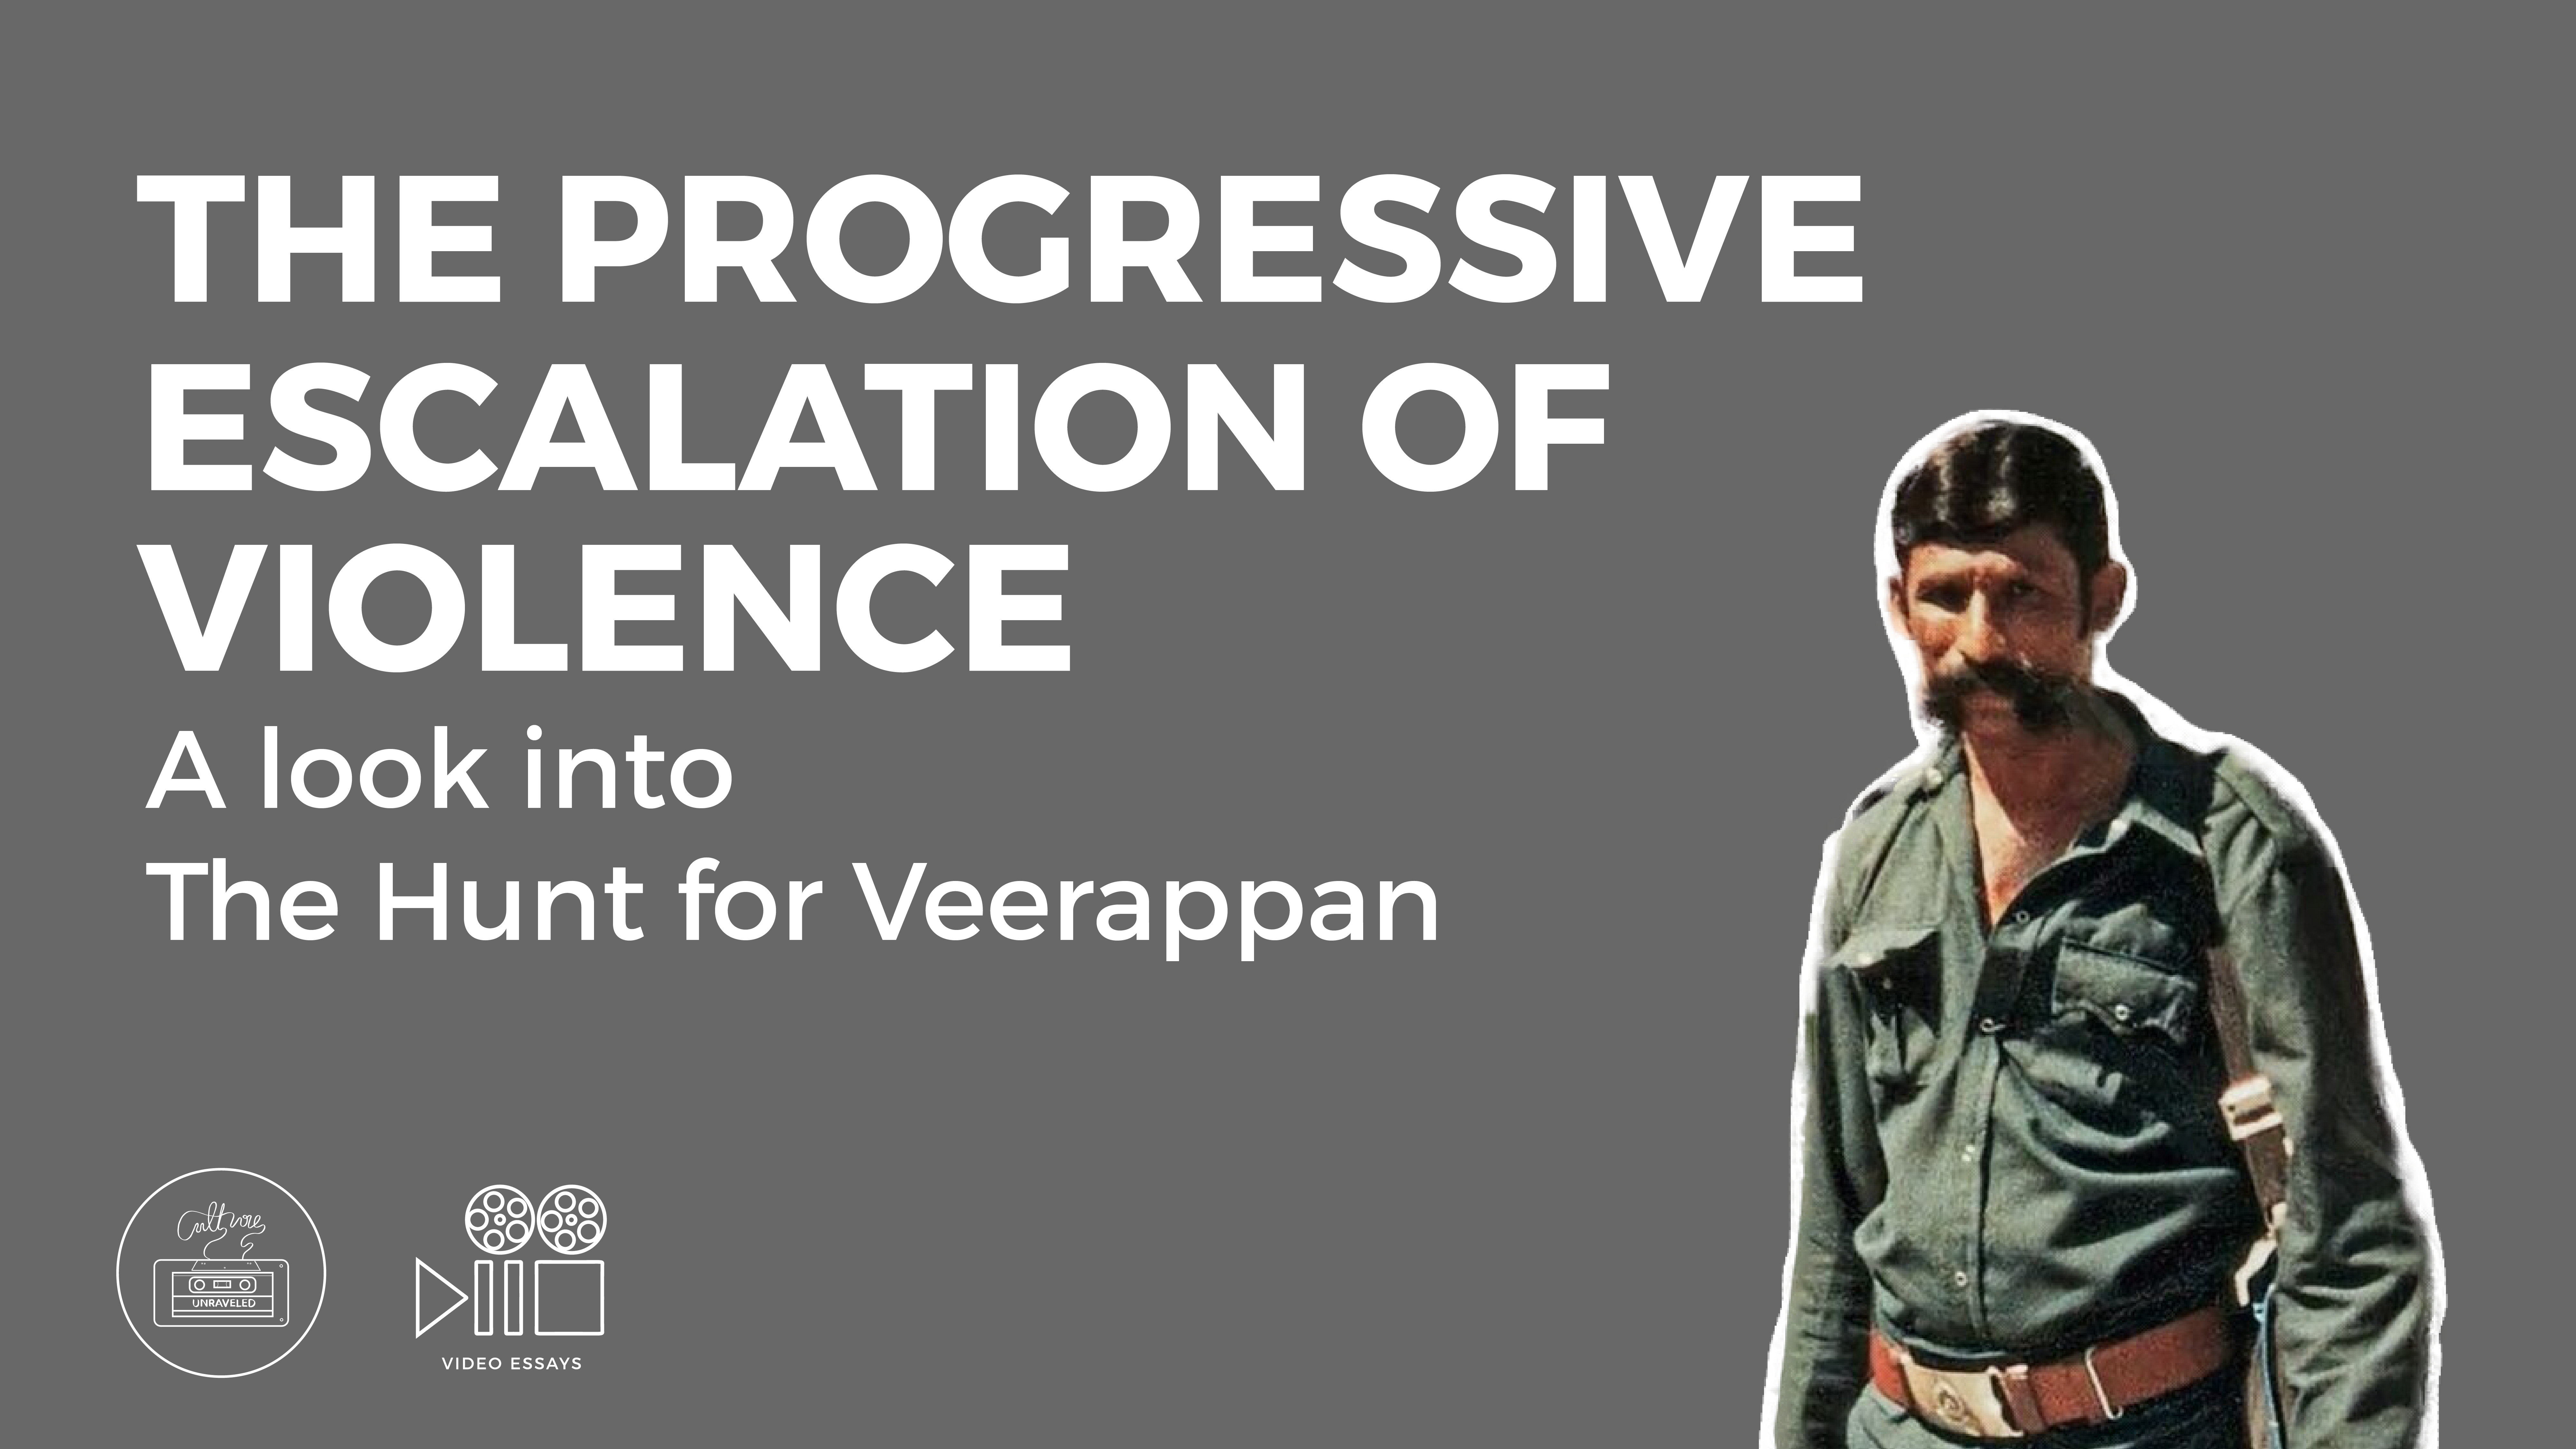 The Progressive Escalation of Violence. A Look into The Hunt for Veerappan